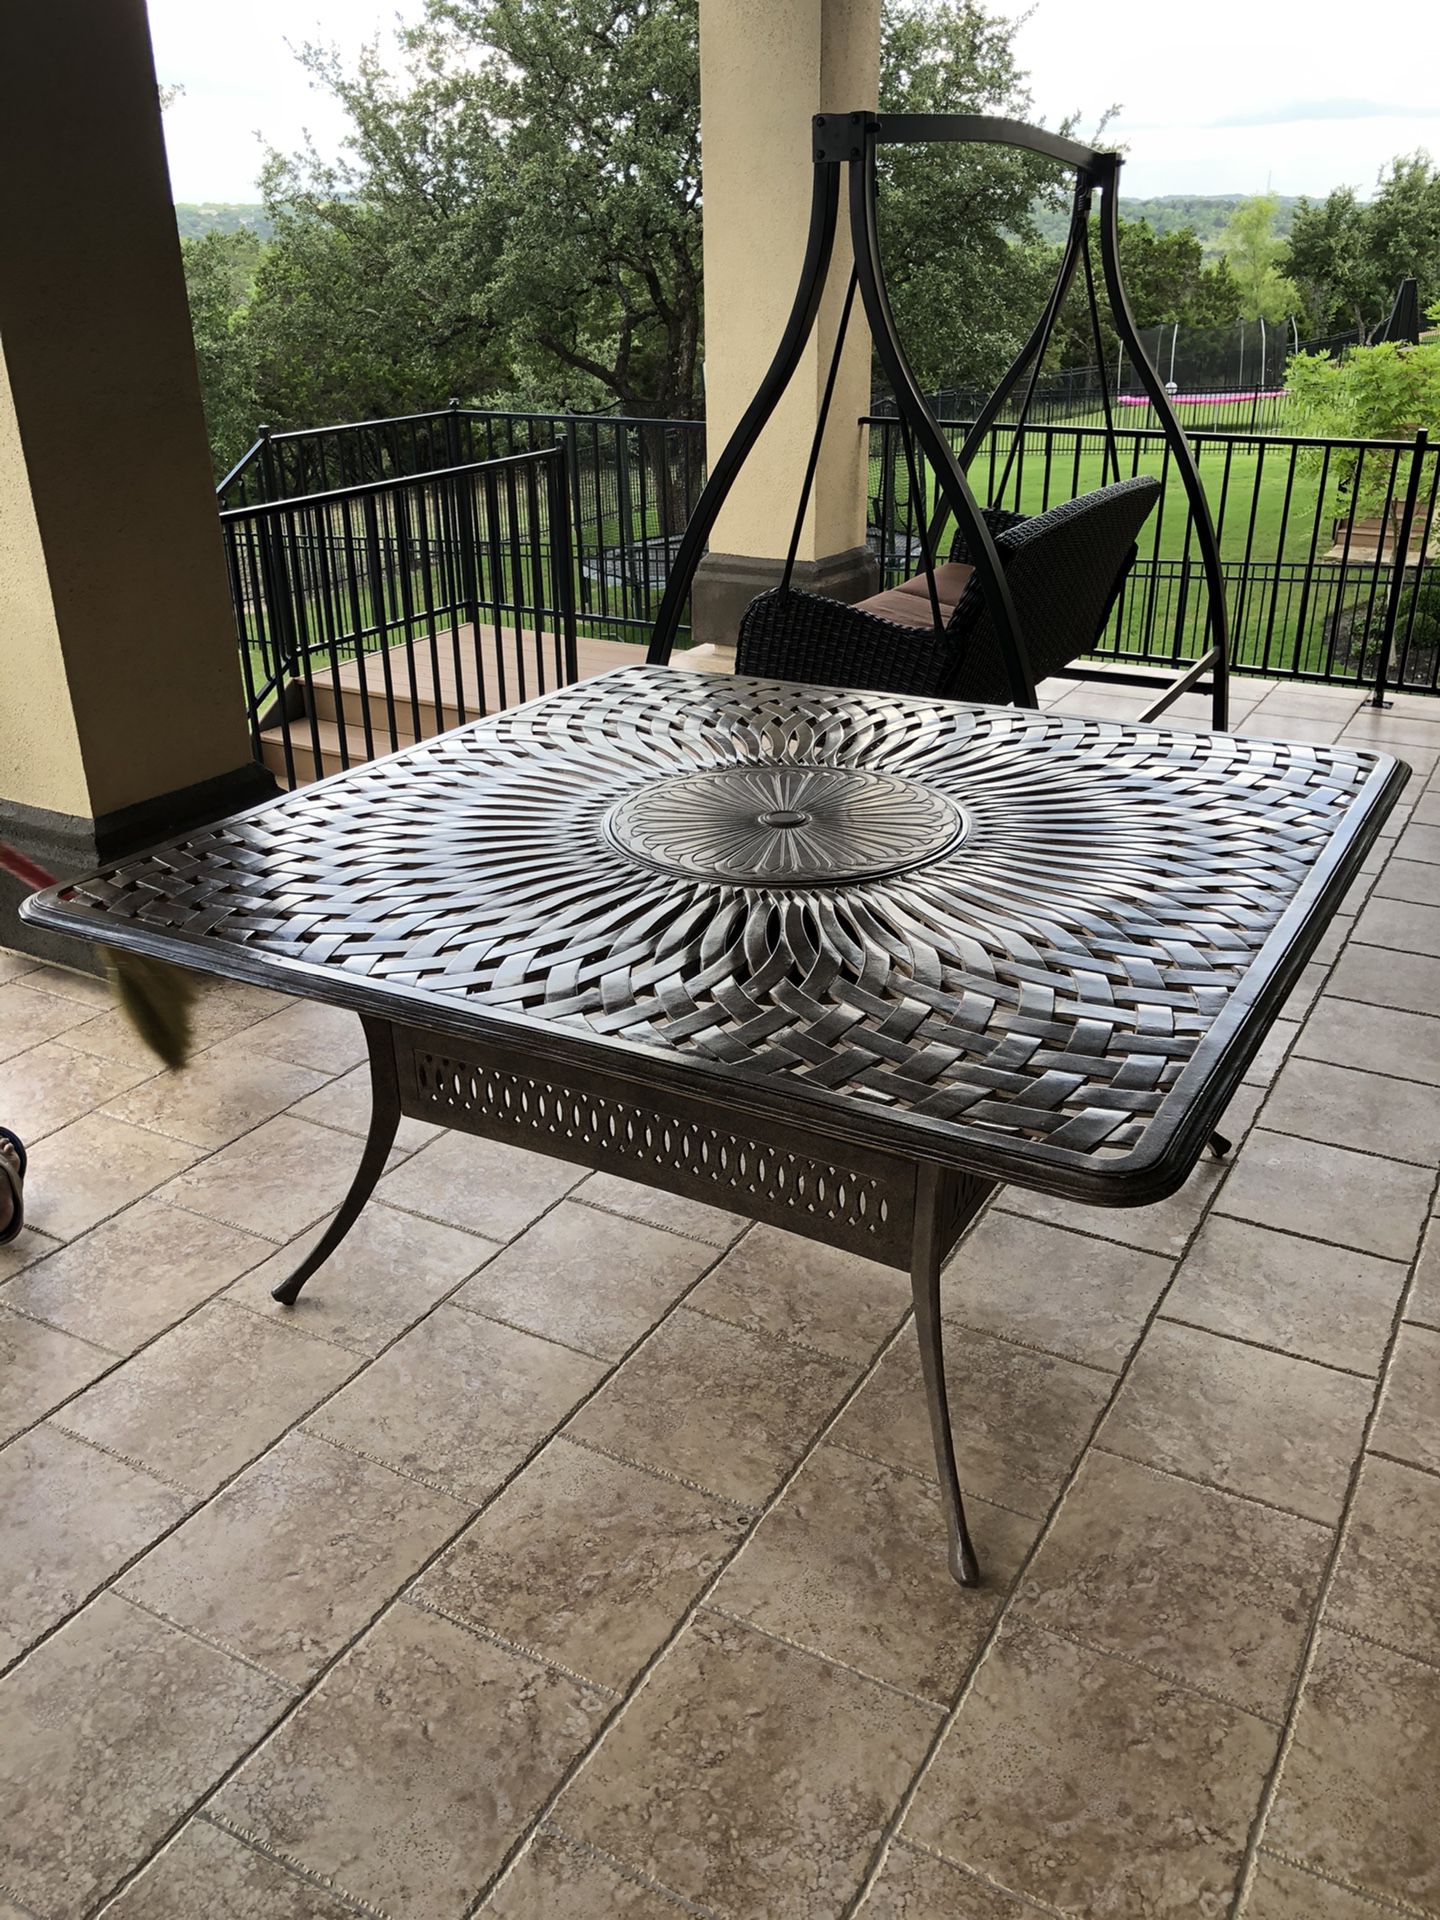 Patio Table Furniture with built-in Grill